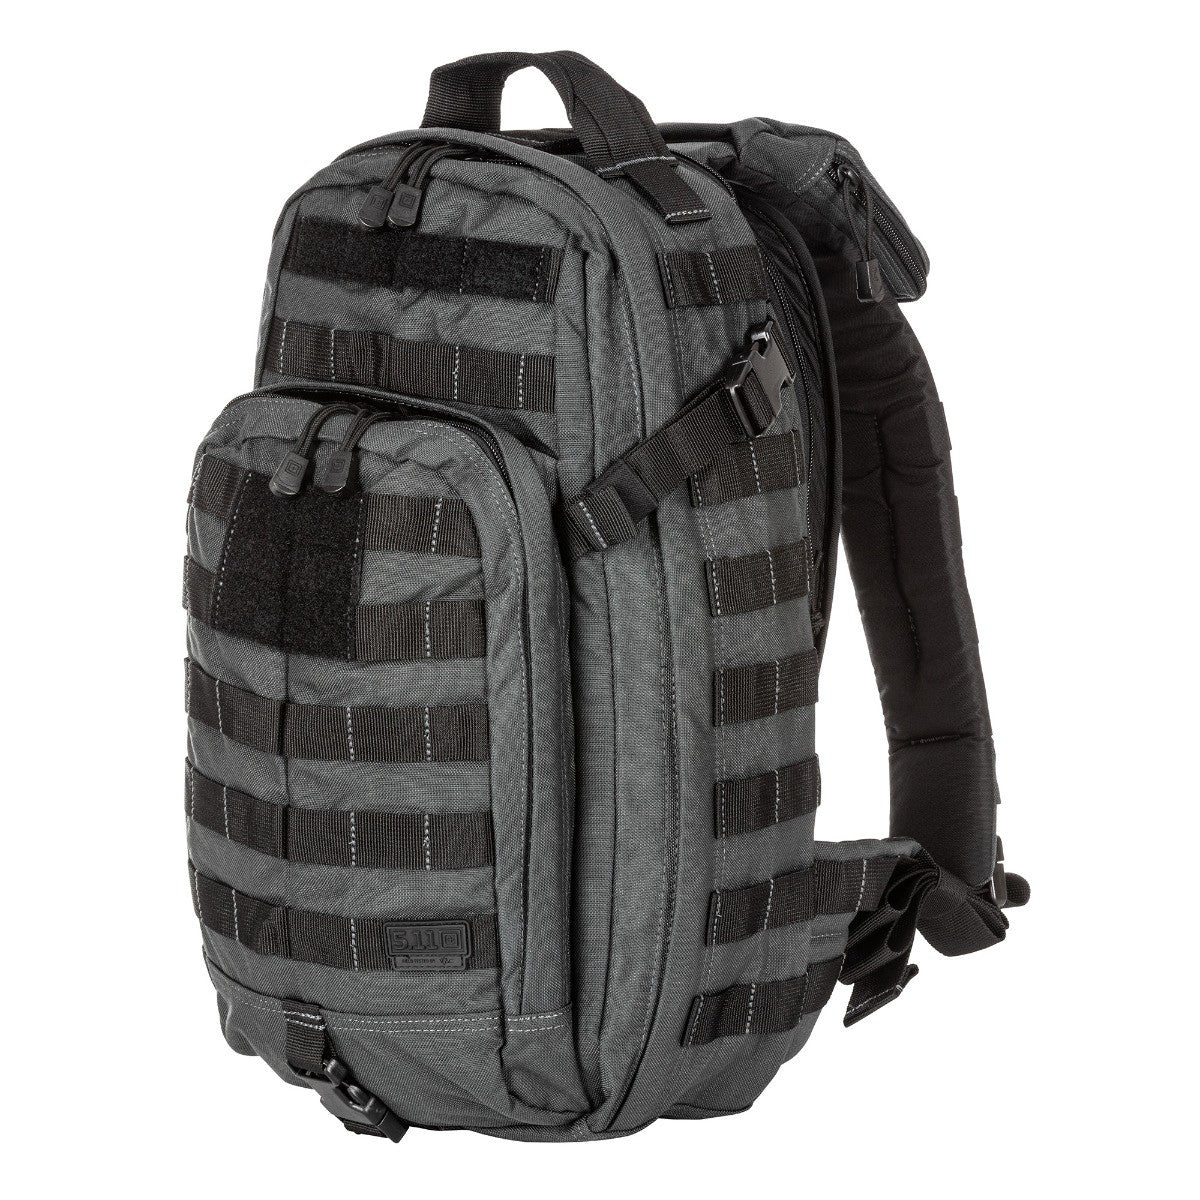 a backpack that is grey and black